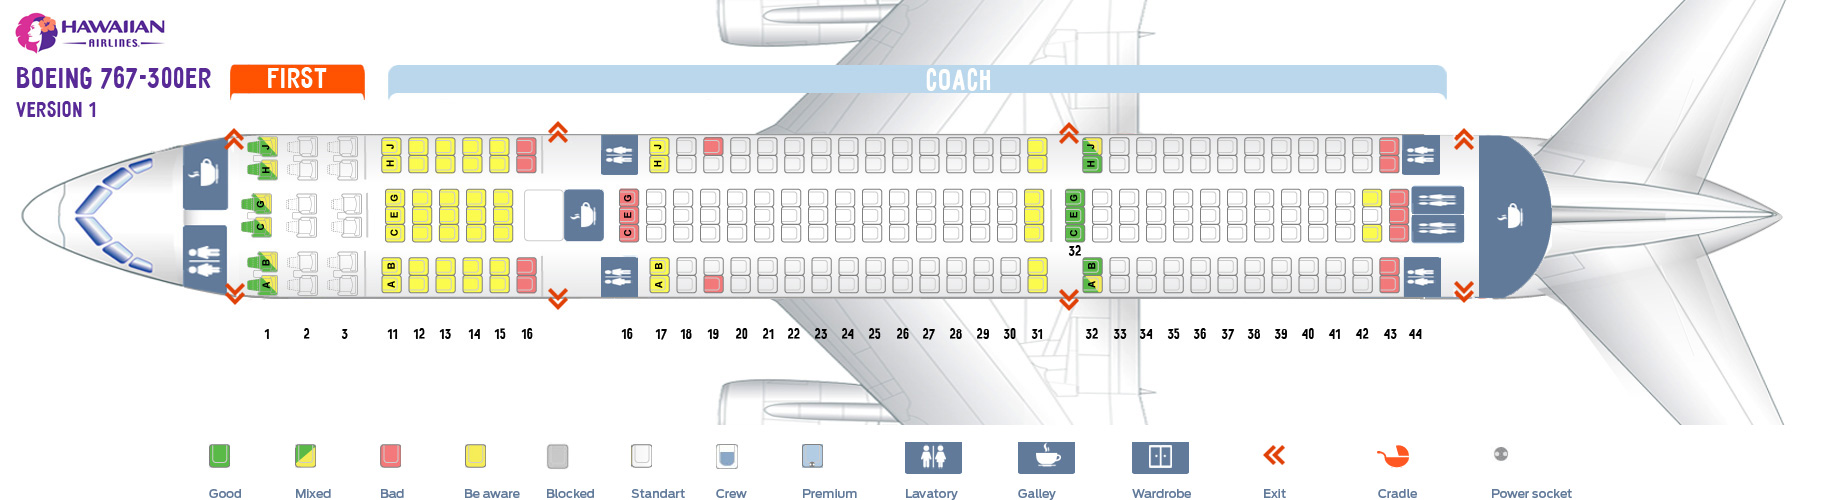 First cabin seat map and seating chart Boeing 767 300ER 763 V1 Hawaiian Airlines